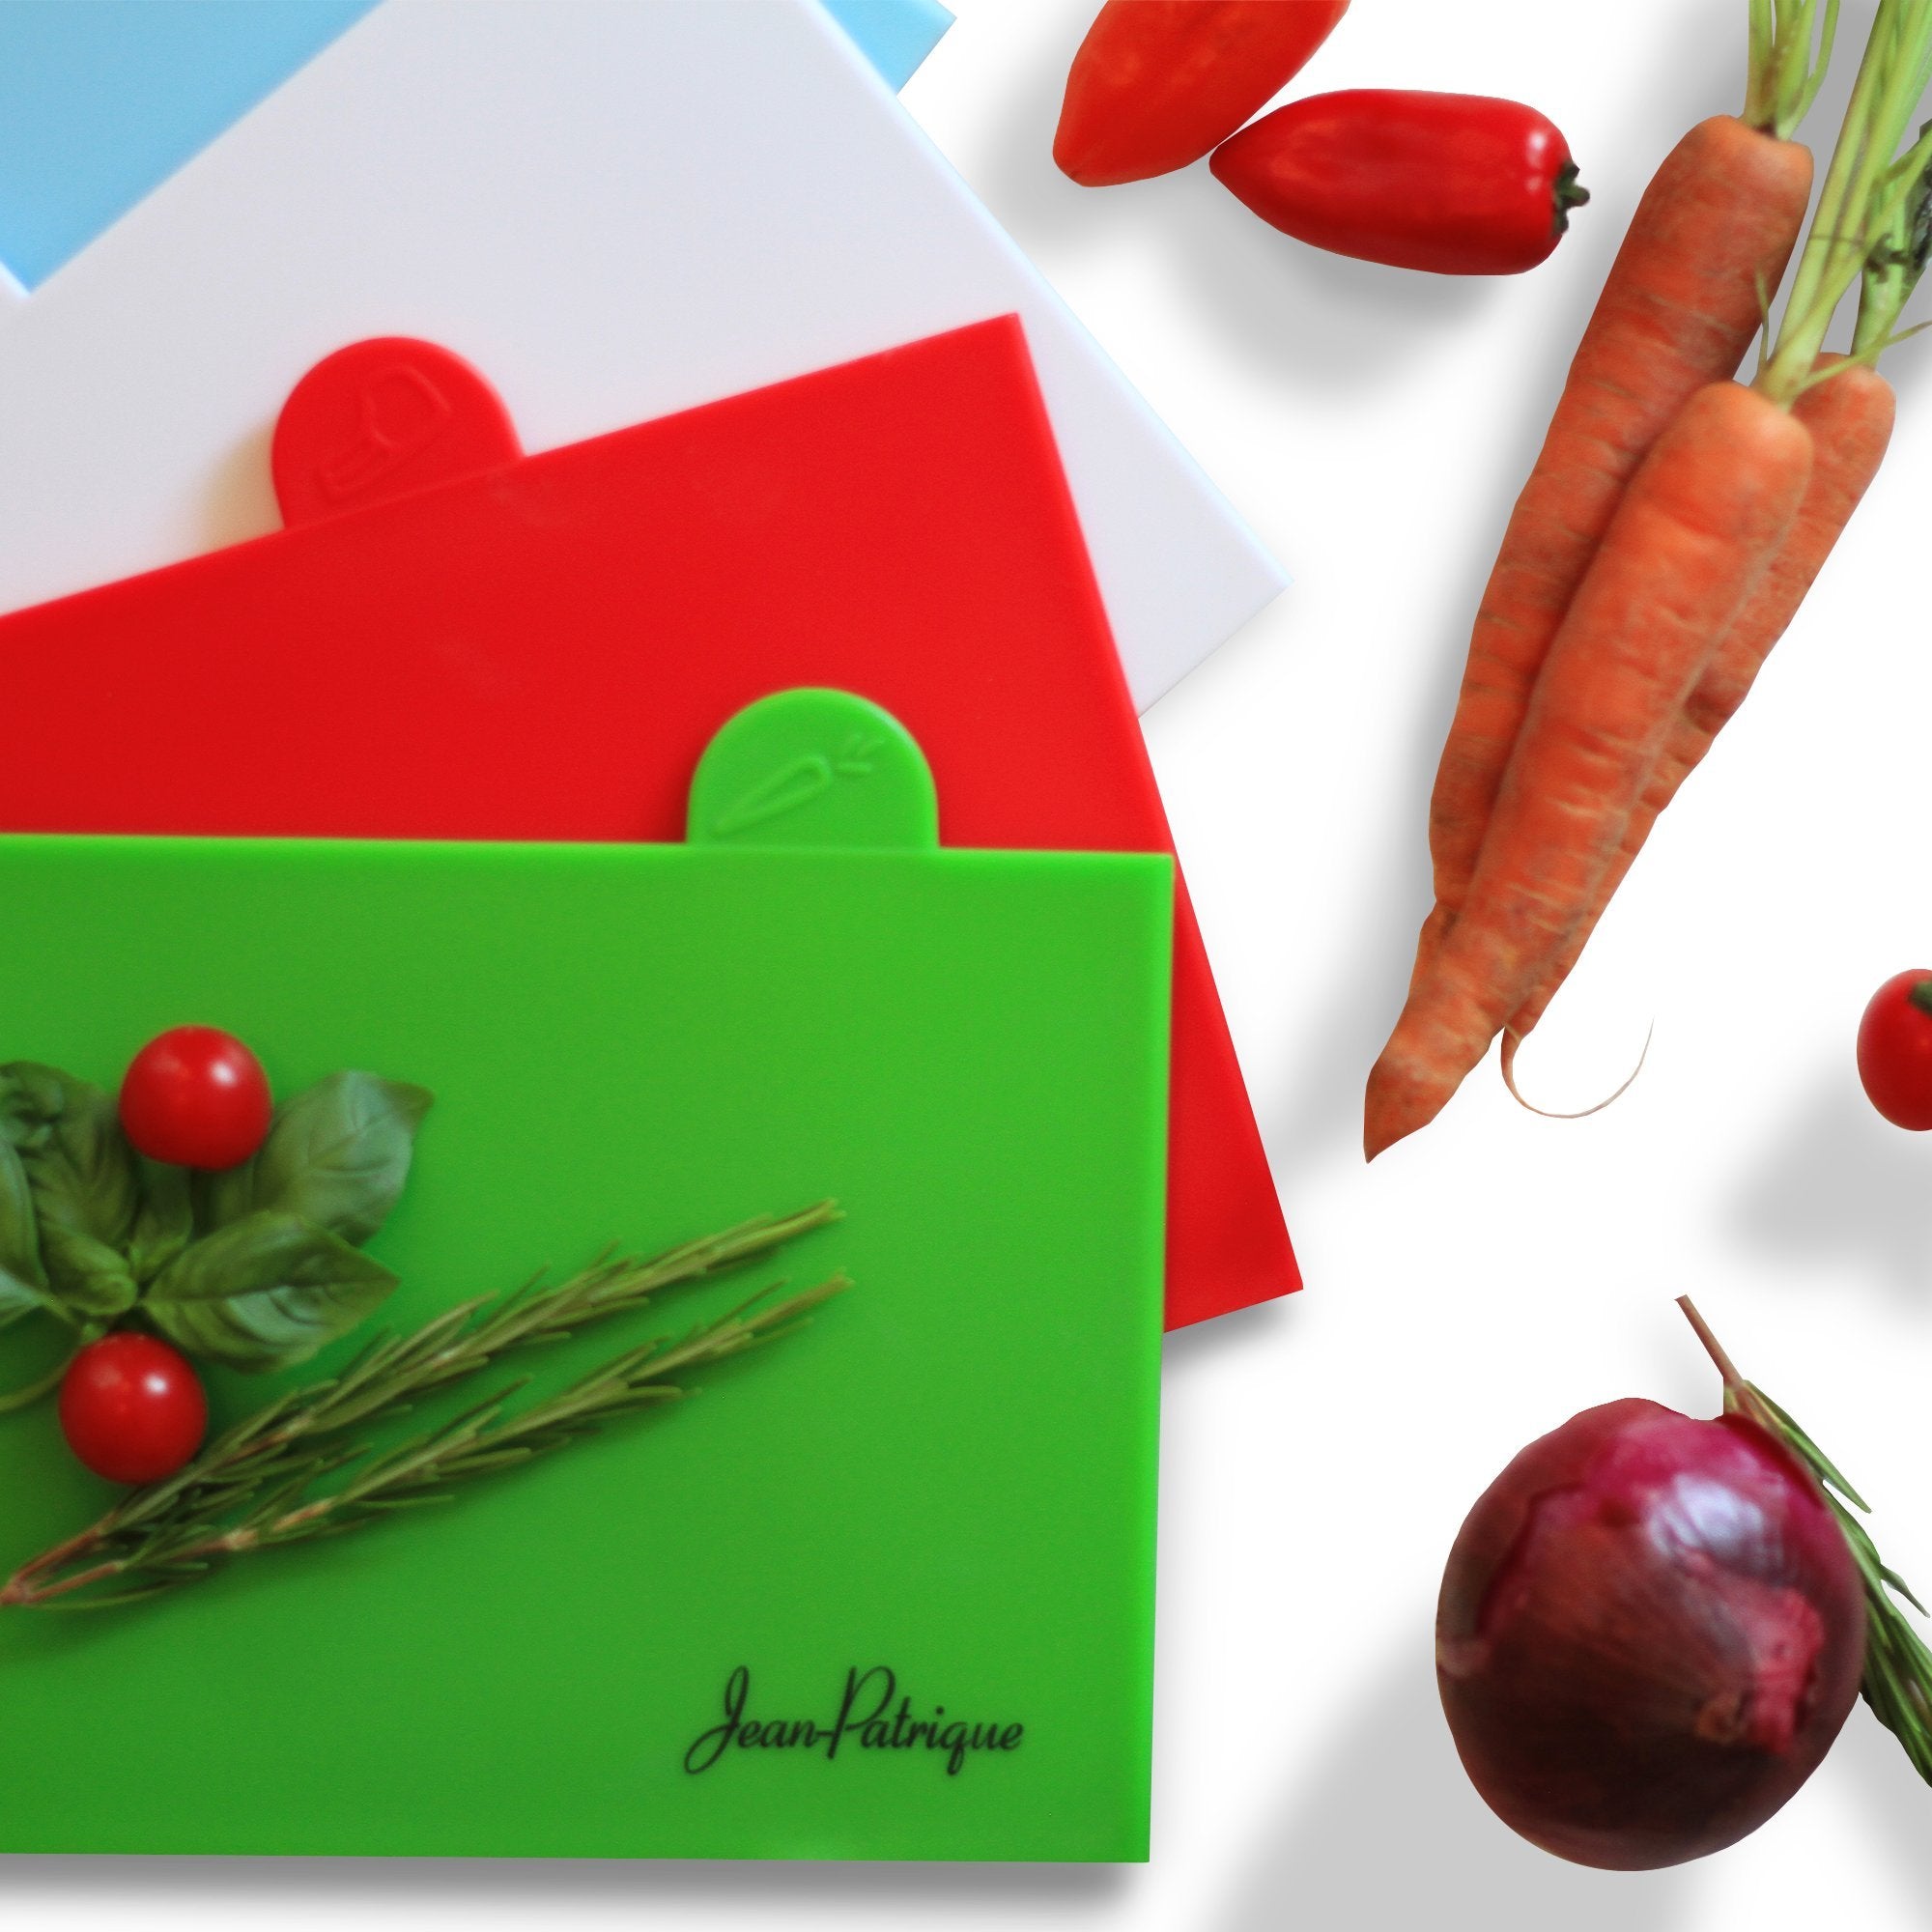 Plastic Cutting Board, Plastic Chopping Boards For Kitchen